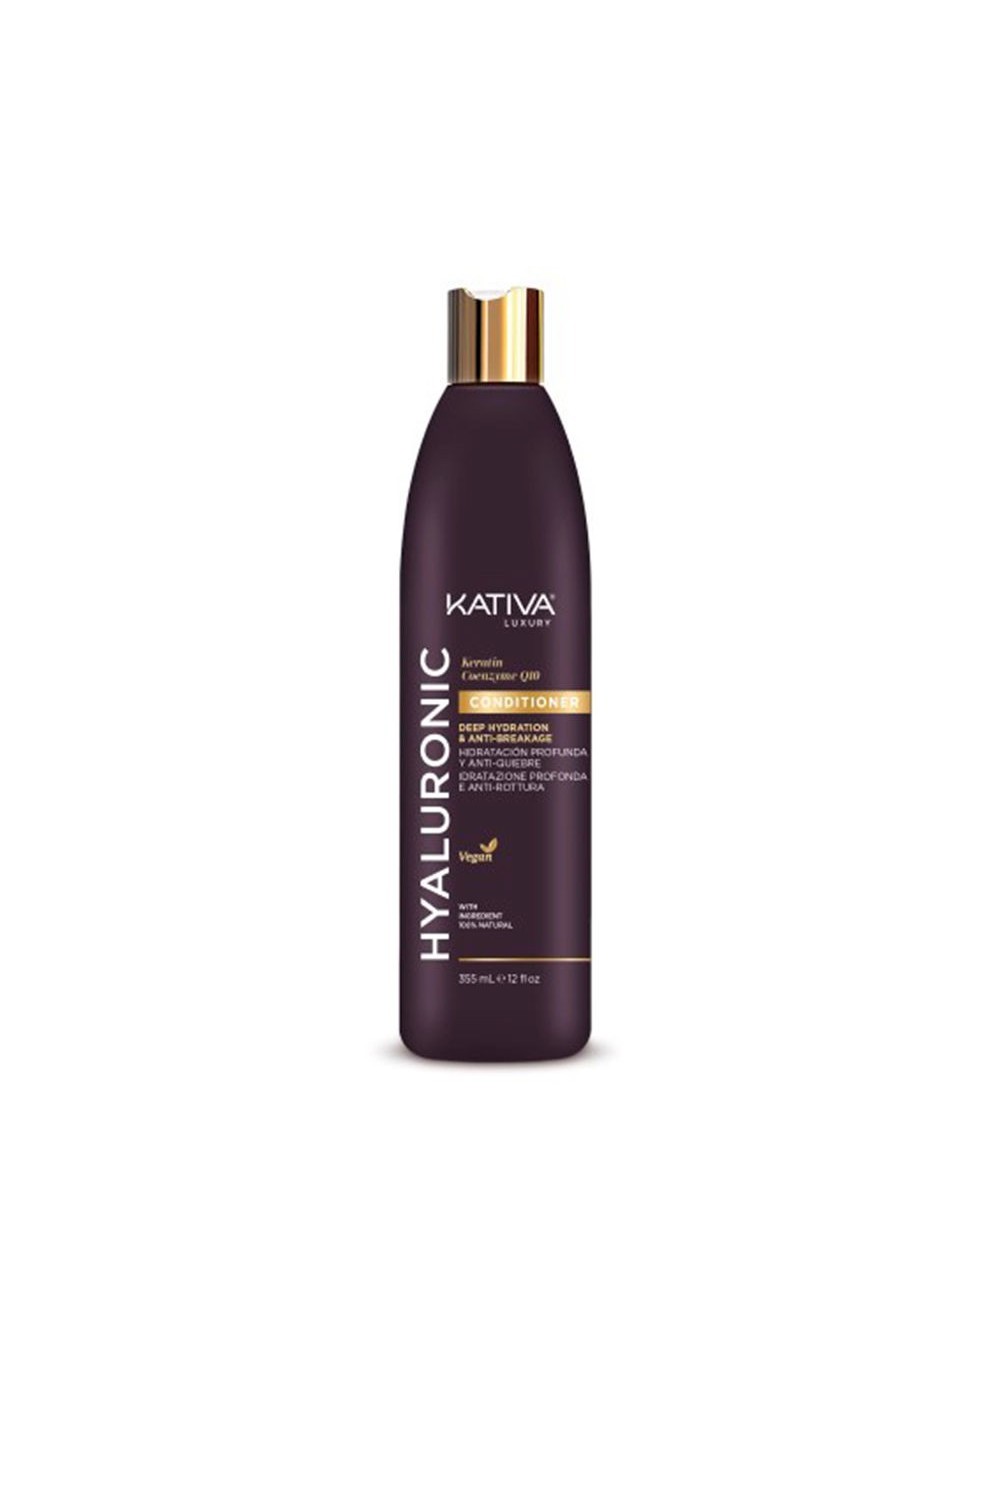 Kativa Hyaluronic Keratin y Coenzyme Q10 Conditioner 355ml